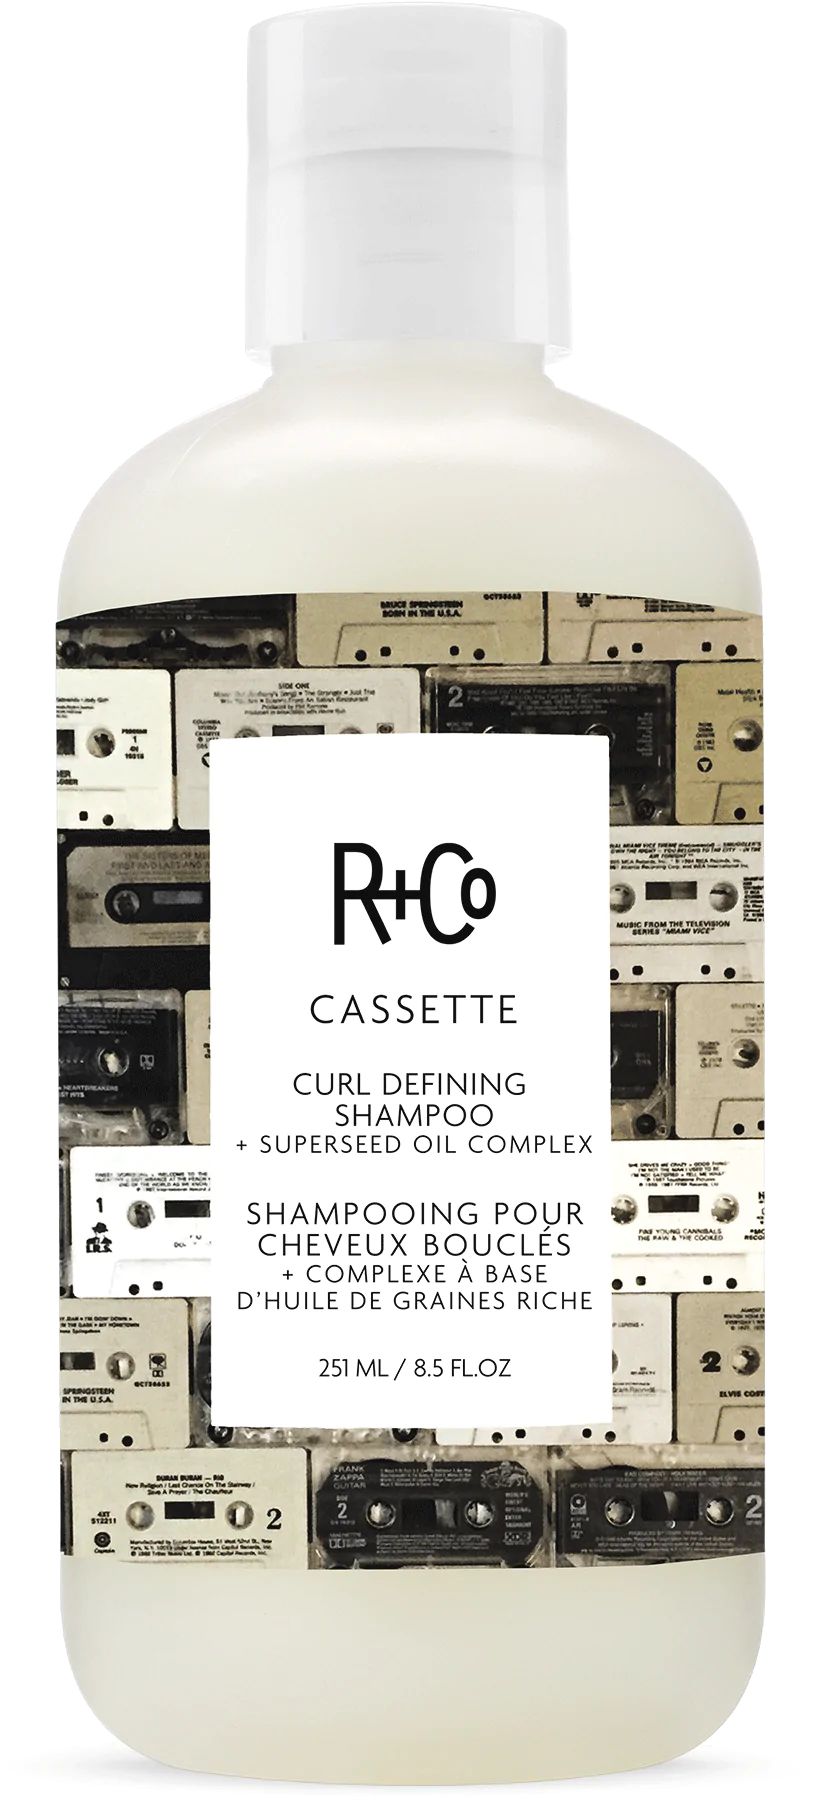 R+Co CASSETTE Curl Defining Shampoo + Superseed Oil Complex - 8.5 OZ | R+Co